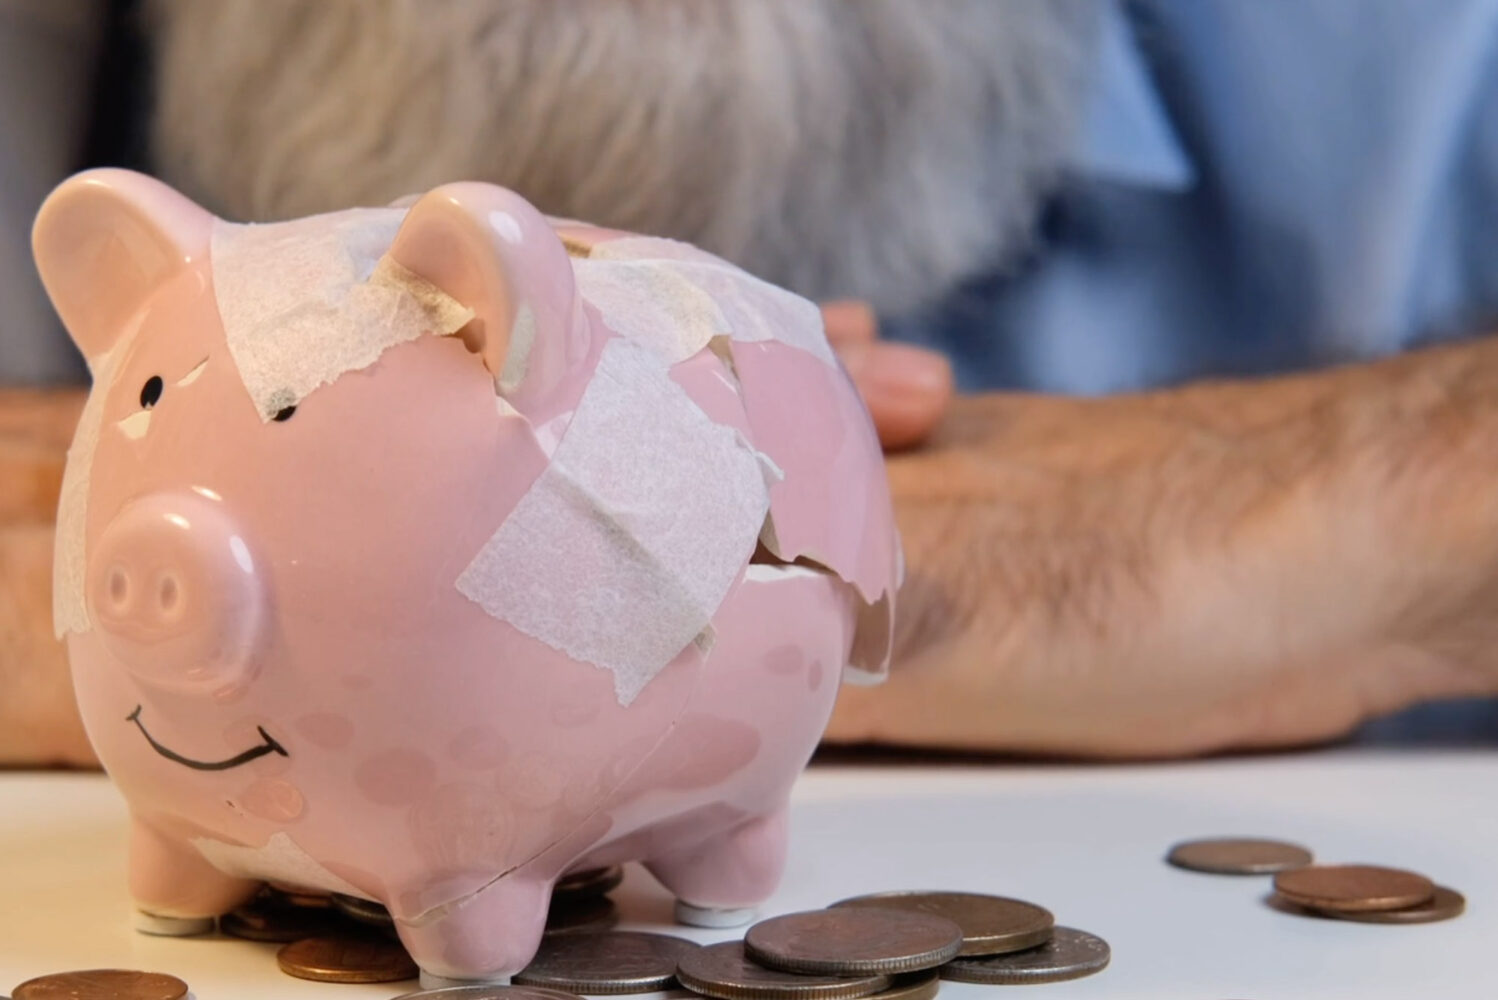 Photo: An older man with a beard sits at a table in front of a broken piggy bank. There are coins all over the table.